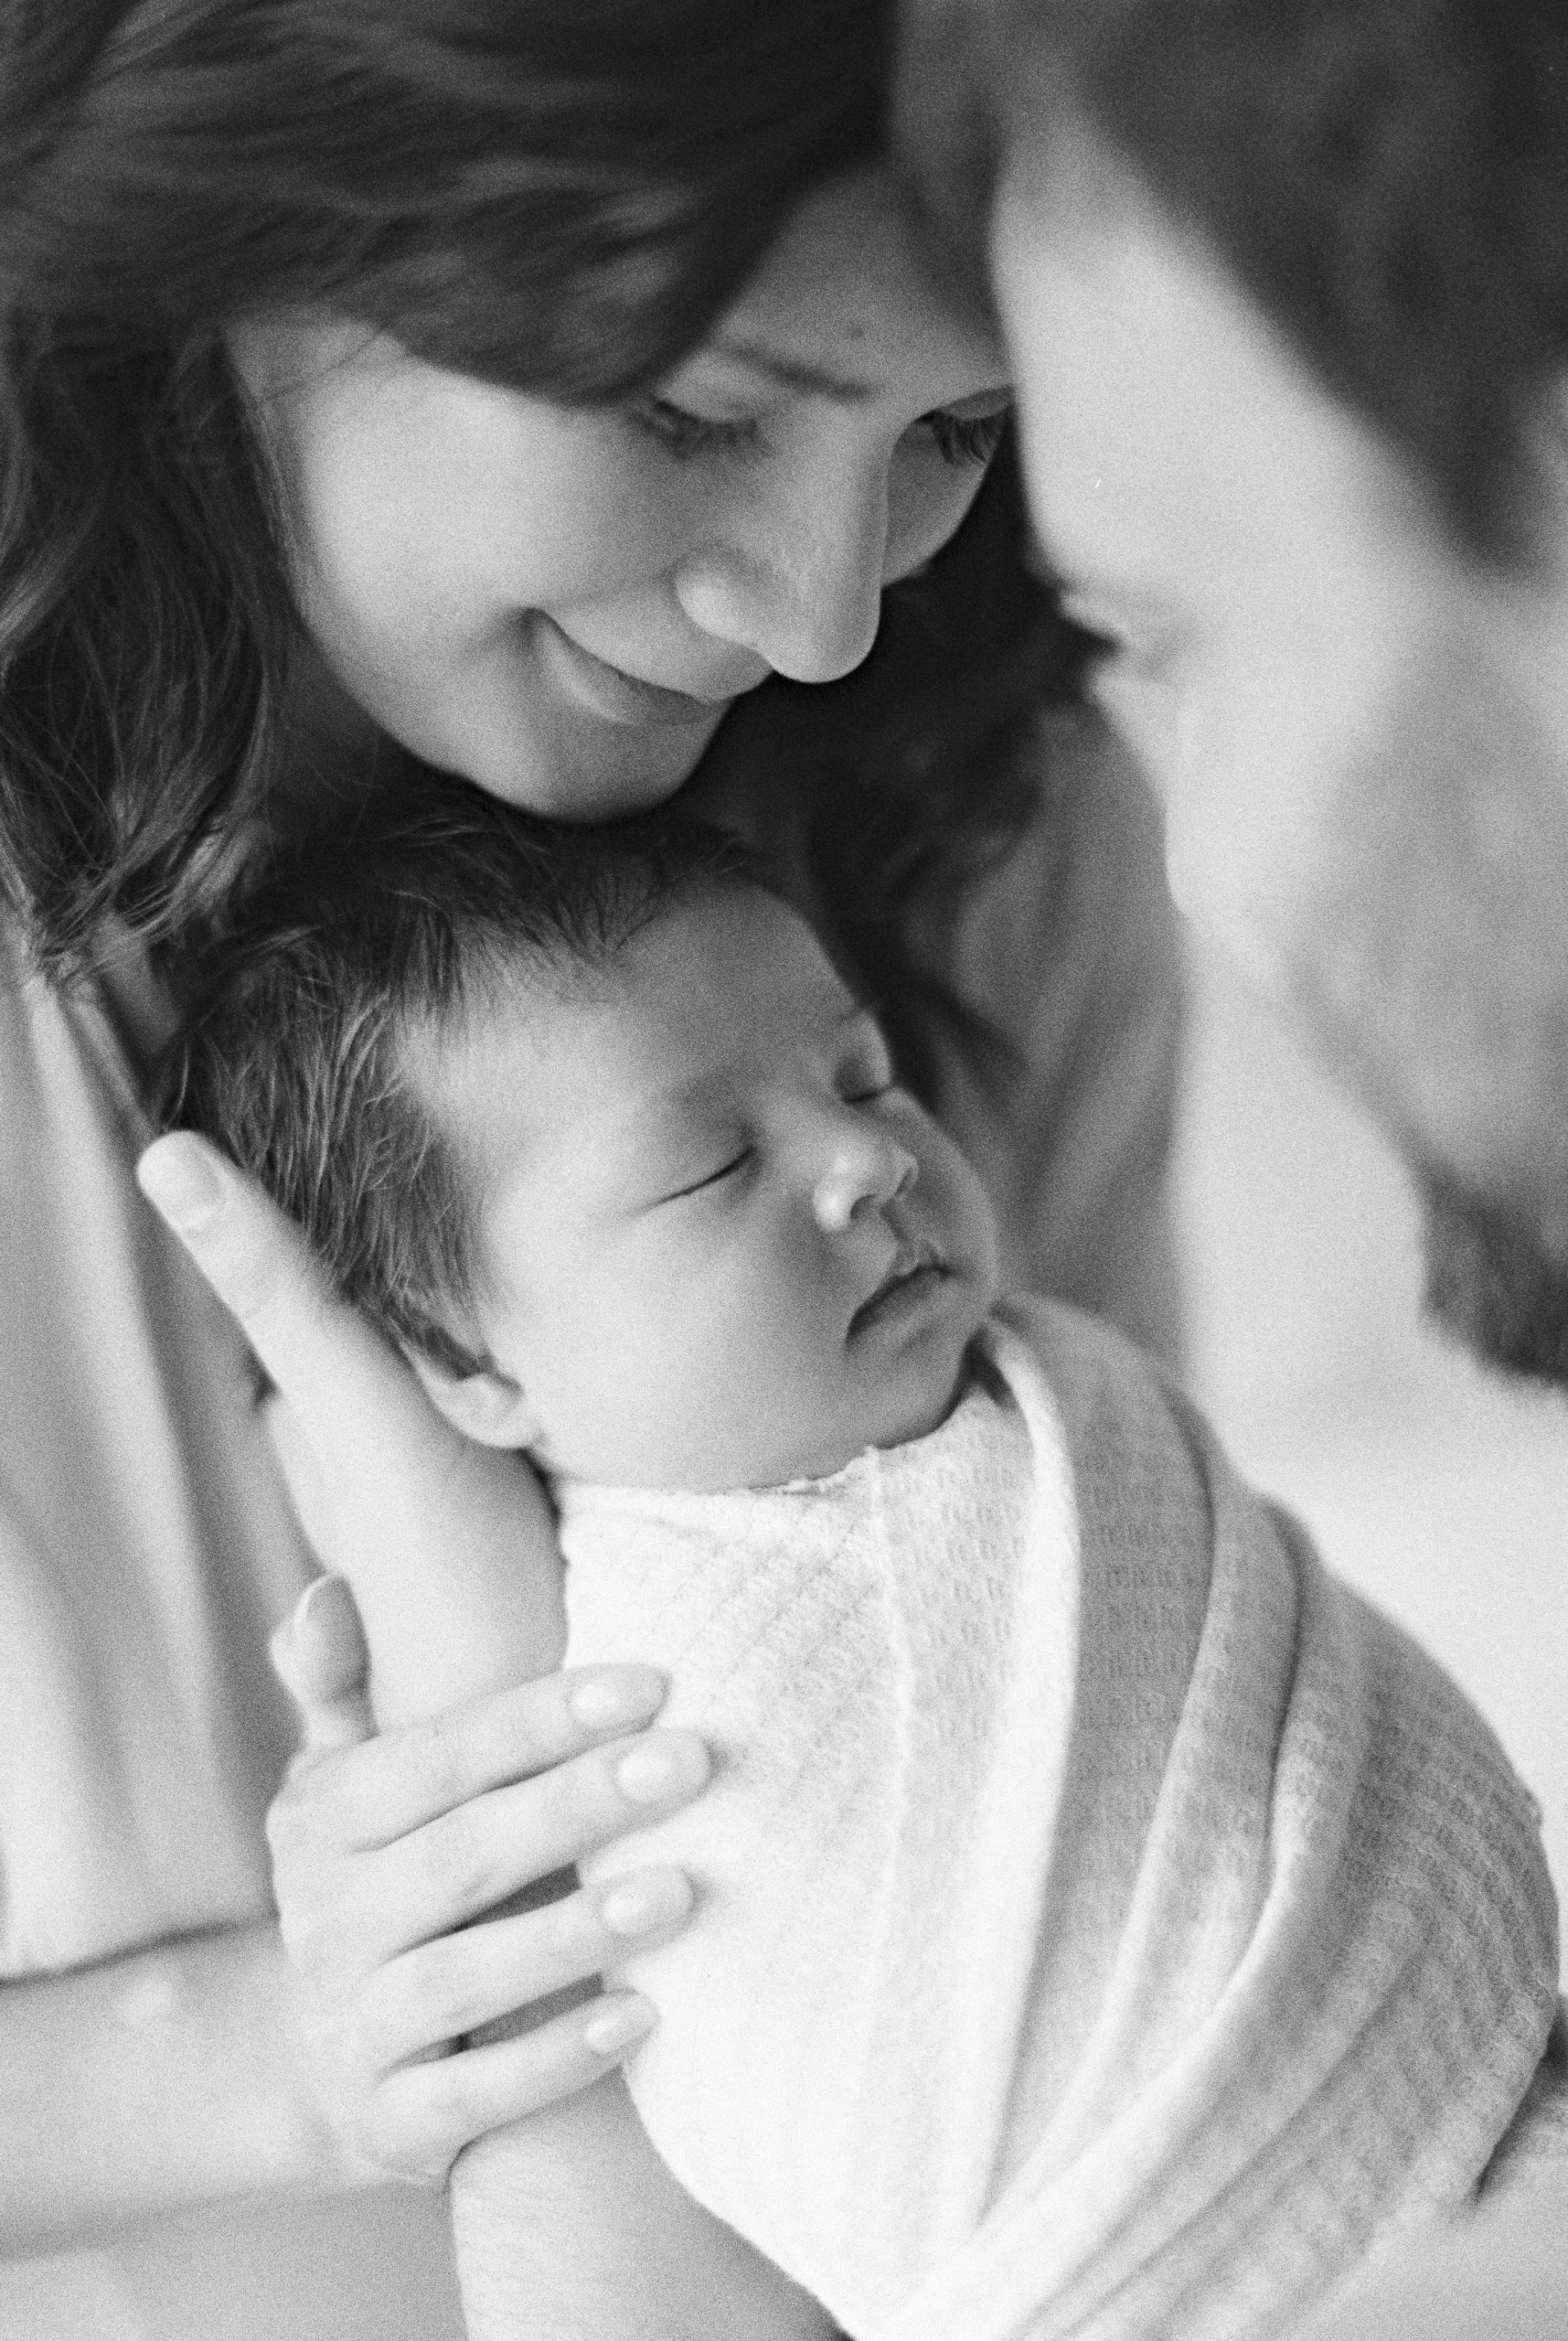 Close up of new family snuggling newborn baby in black and white